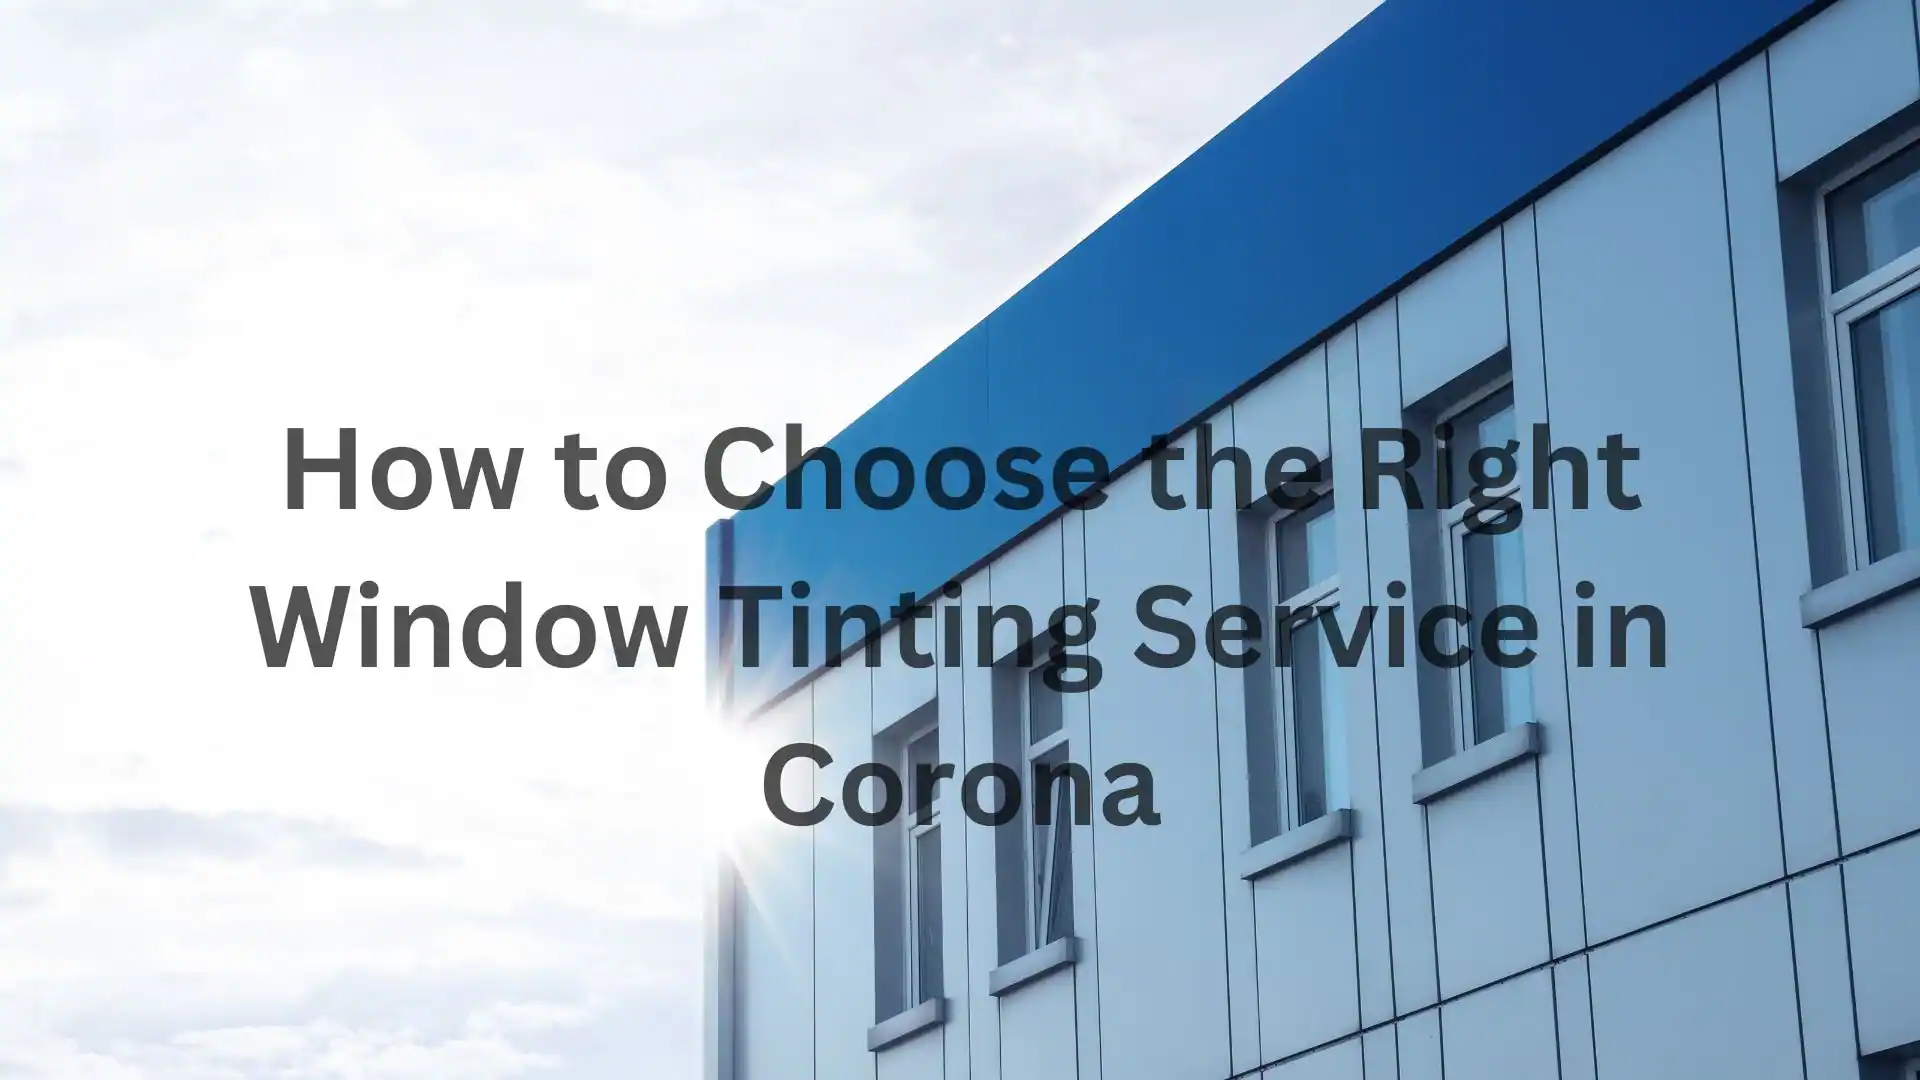 How to Choose the Right Window Tinting Service in Corona